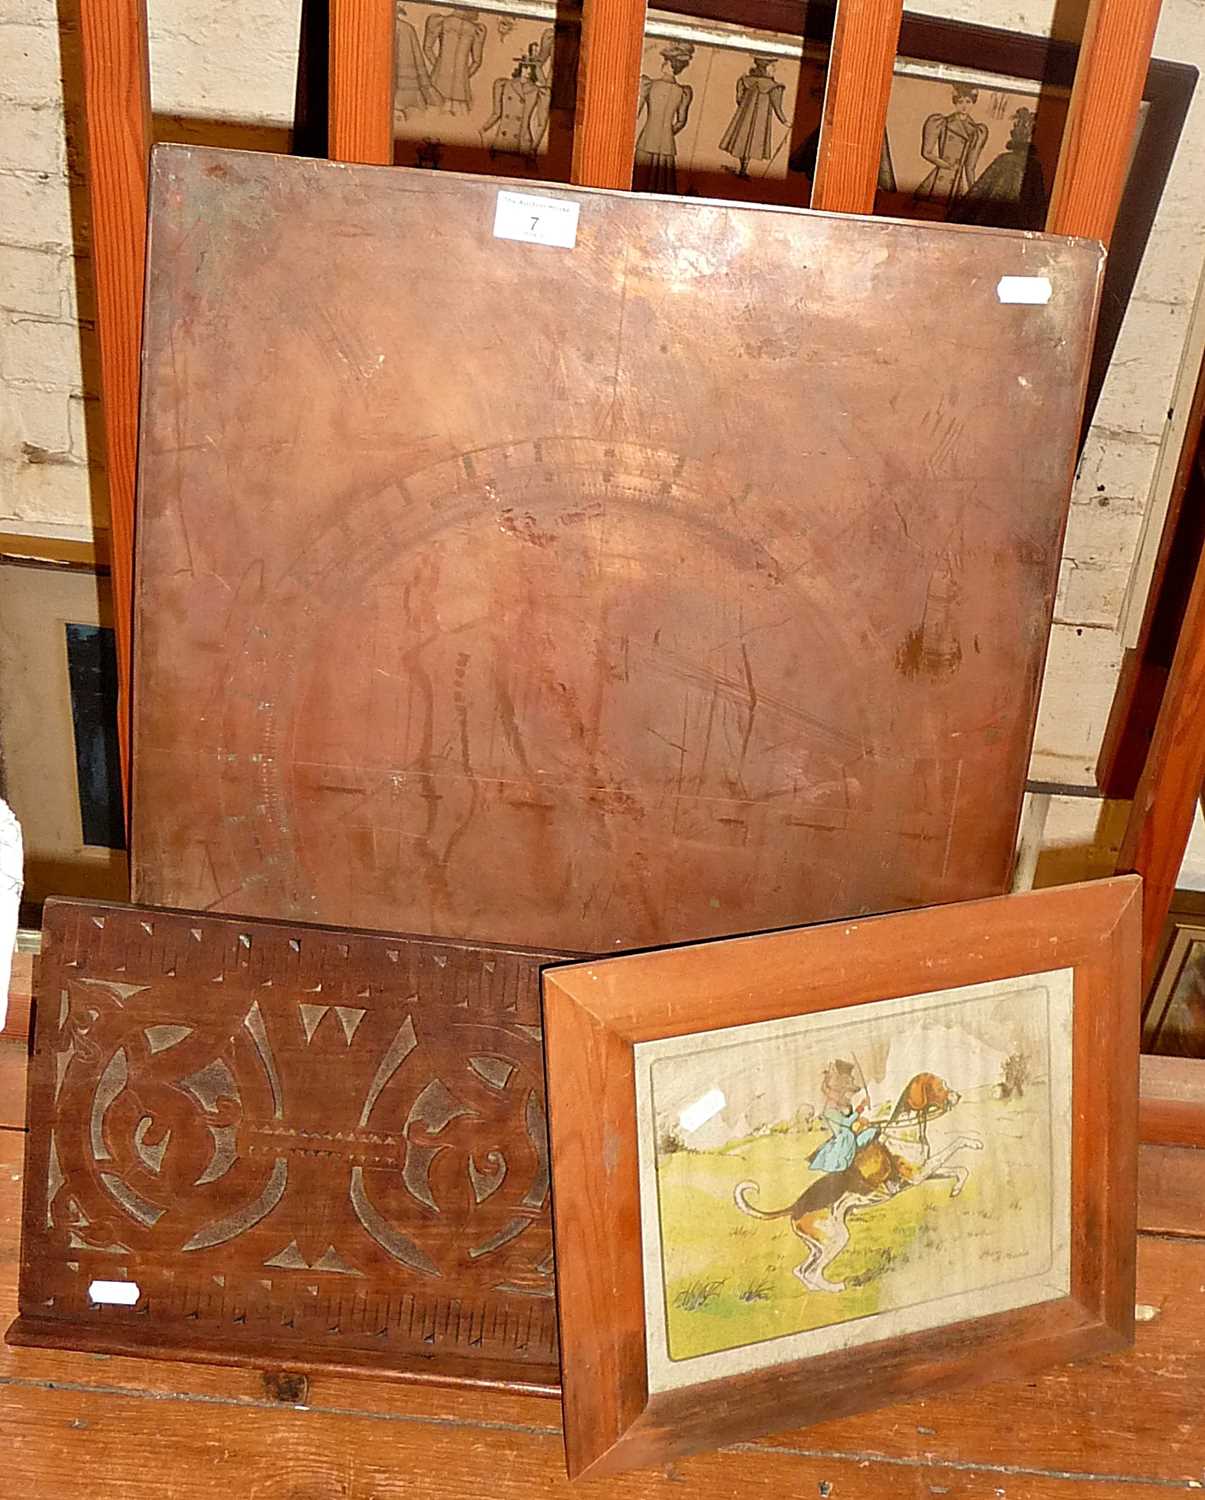 19th c. etched copper plate of the points of the compass, a humorous fox on hound print and a carved